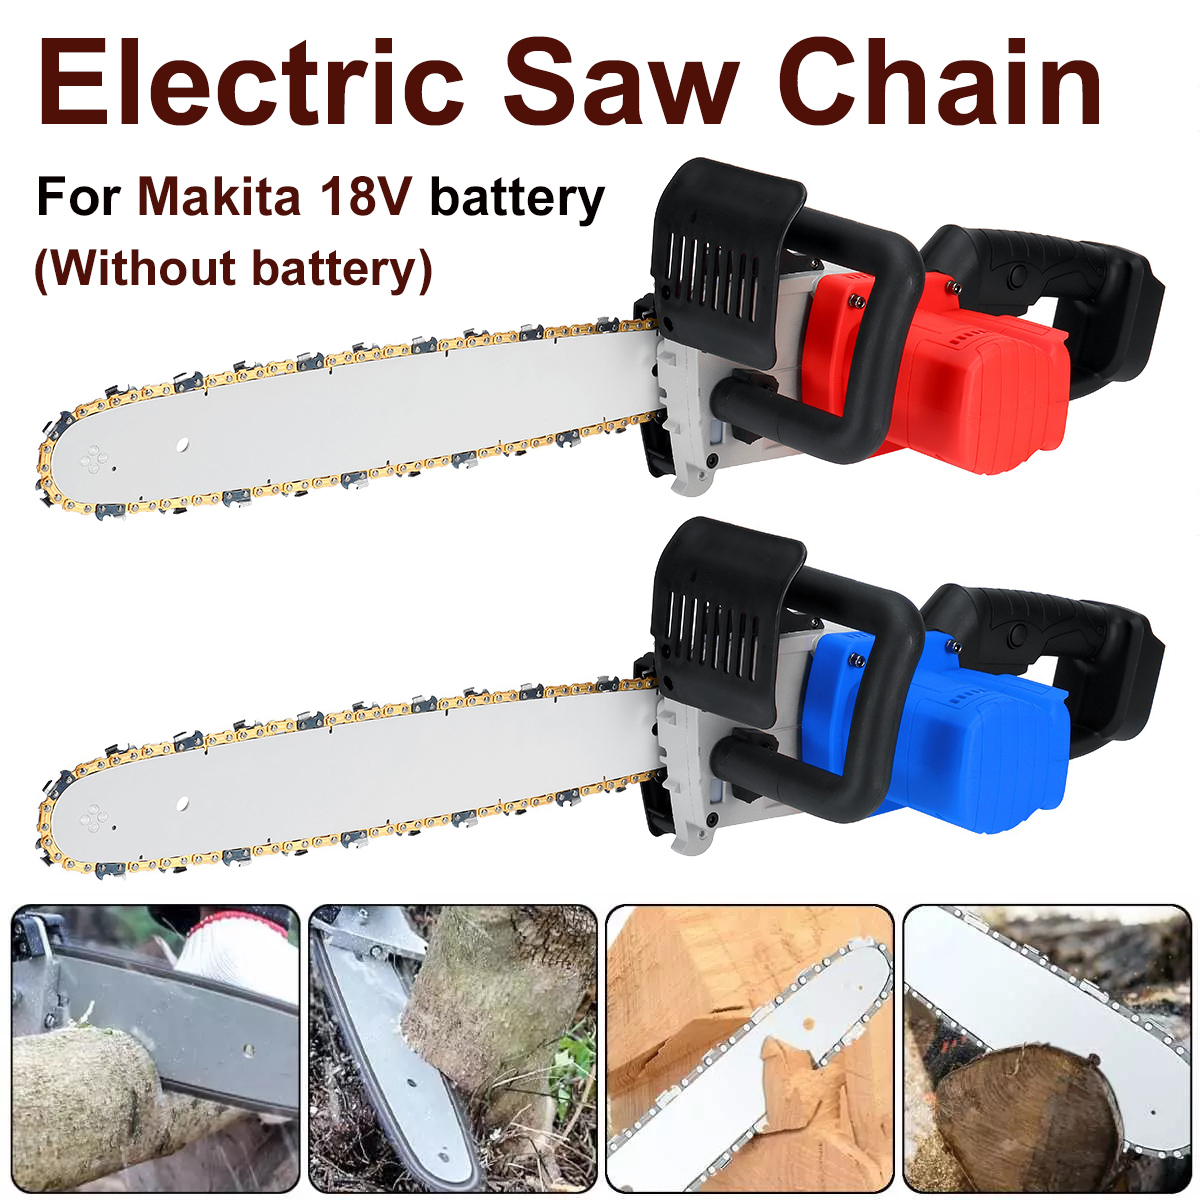 Electric-Chainsaw-Wood-Cutters-Rechargeable-Saw-For-Makita-18v-battery-1770427-1